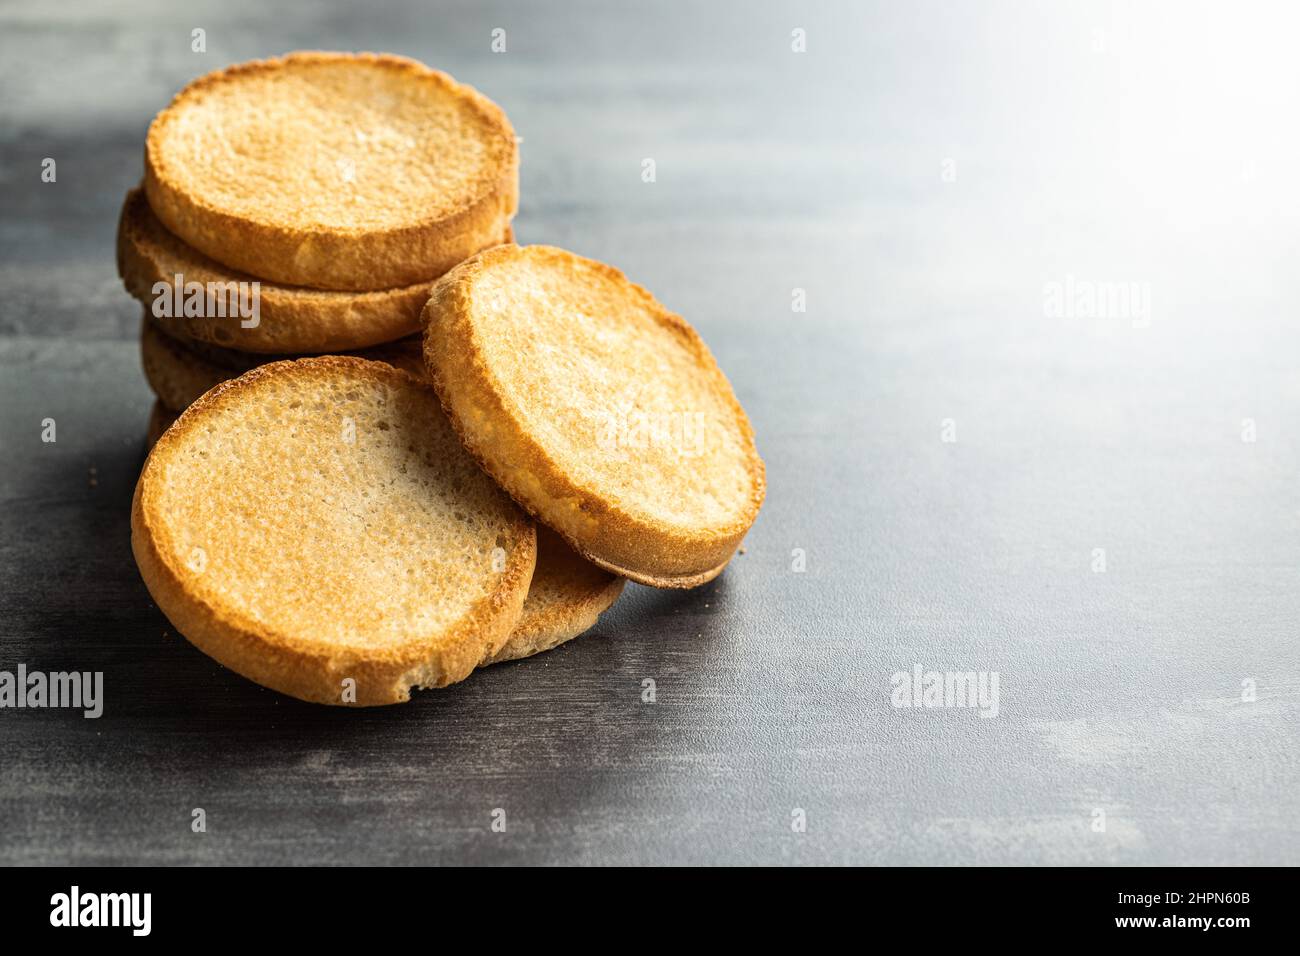 Dietary rusks bread. Crusty biscuits on kitchen table. Stock Photo